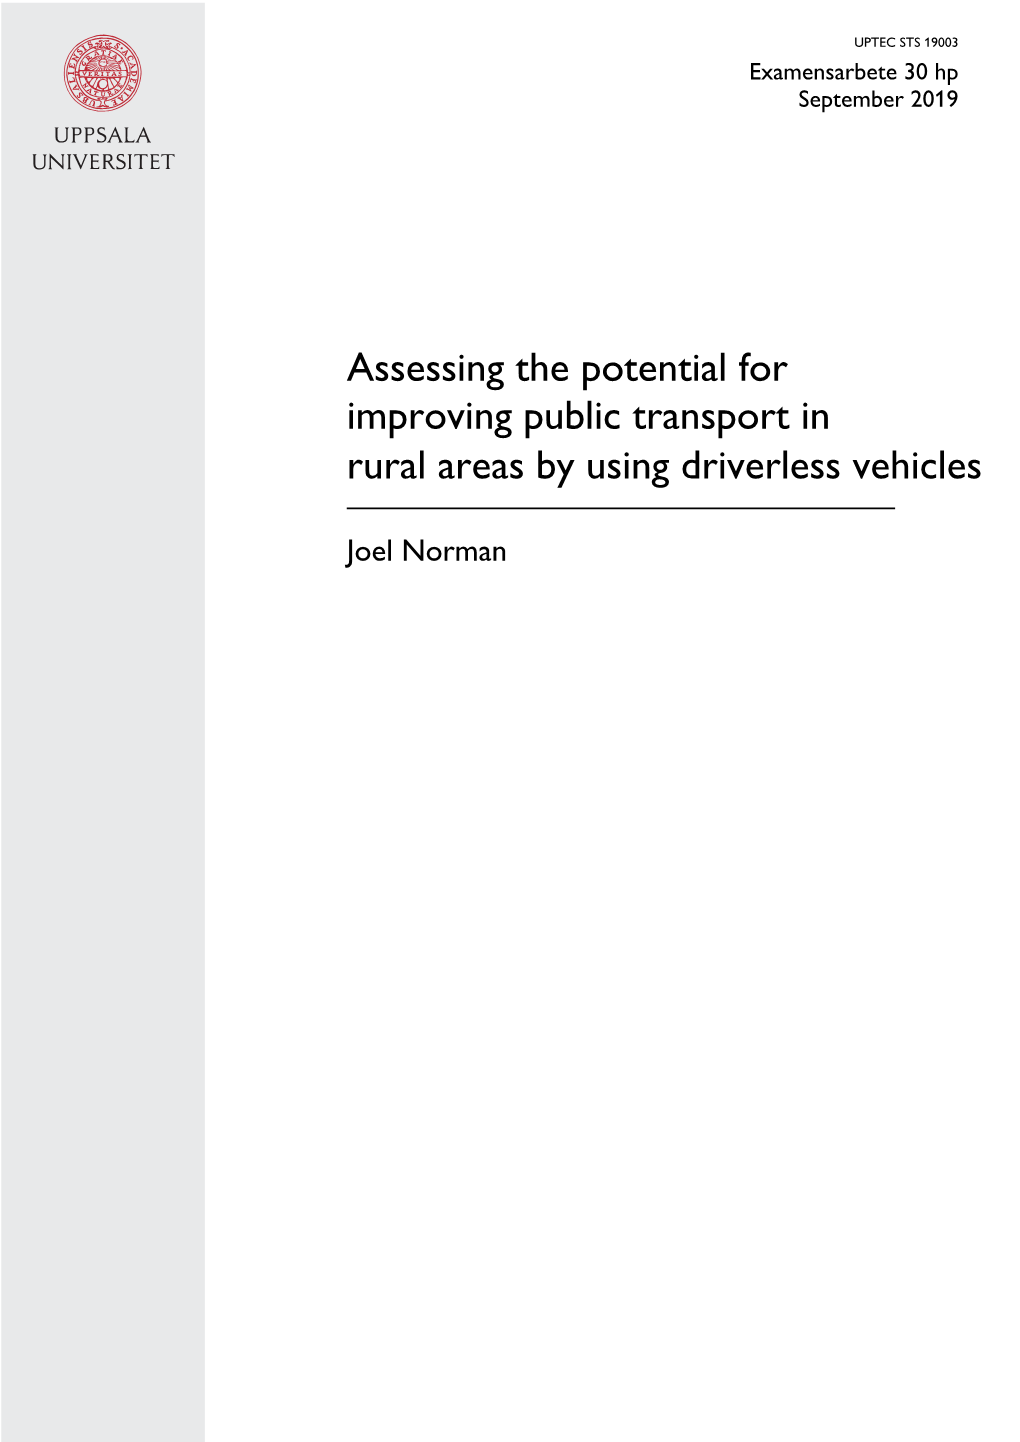 Assessing the Potential for Improving Public Transport in Rural Areas by Using Driverless Vehicles